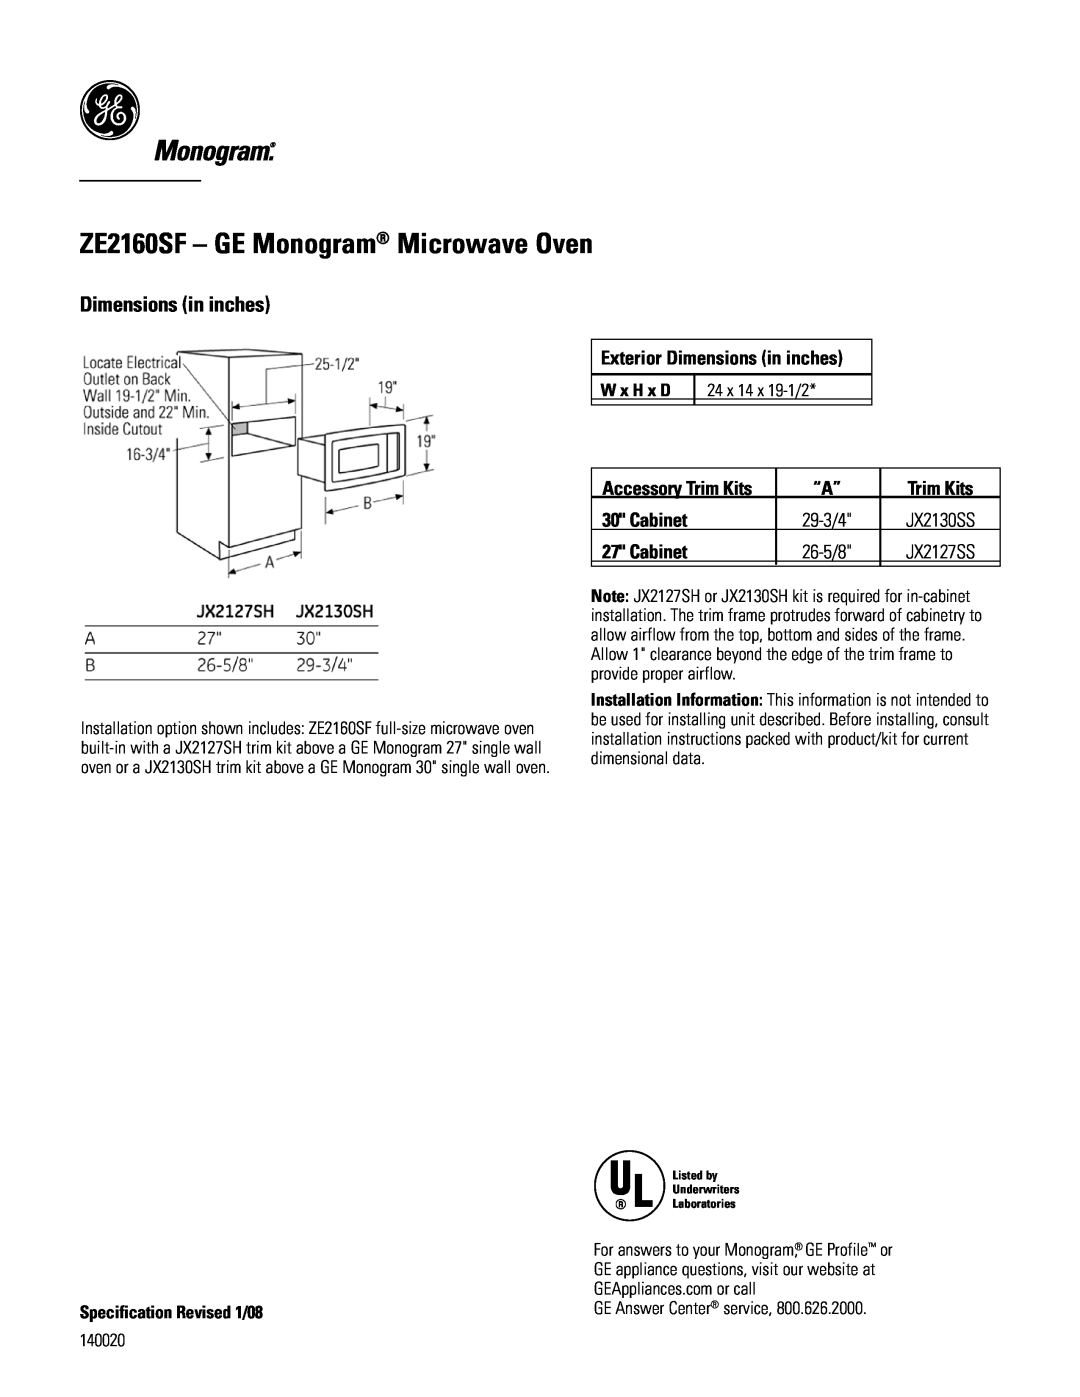 GE dimensions ZE2160SF - GE Monogram Microwave Oven, W x H x D, 24 x 14 x 19-1/2, Accessory Trim Kits, 140020, Cabinet 